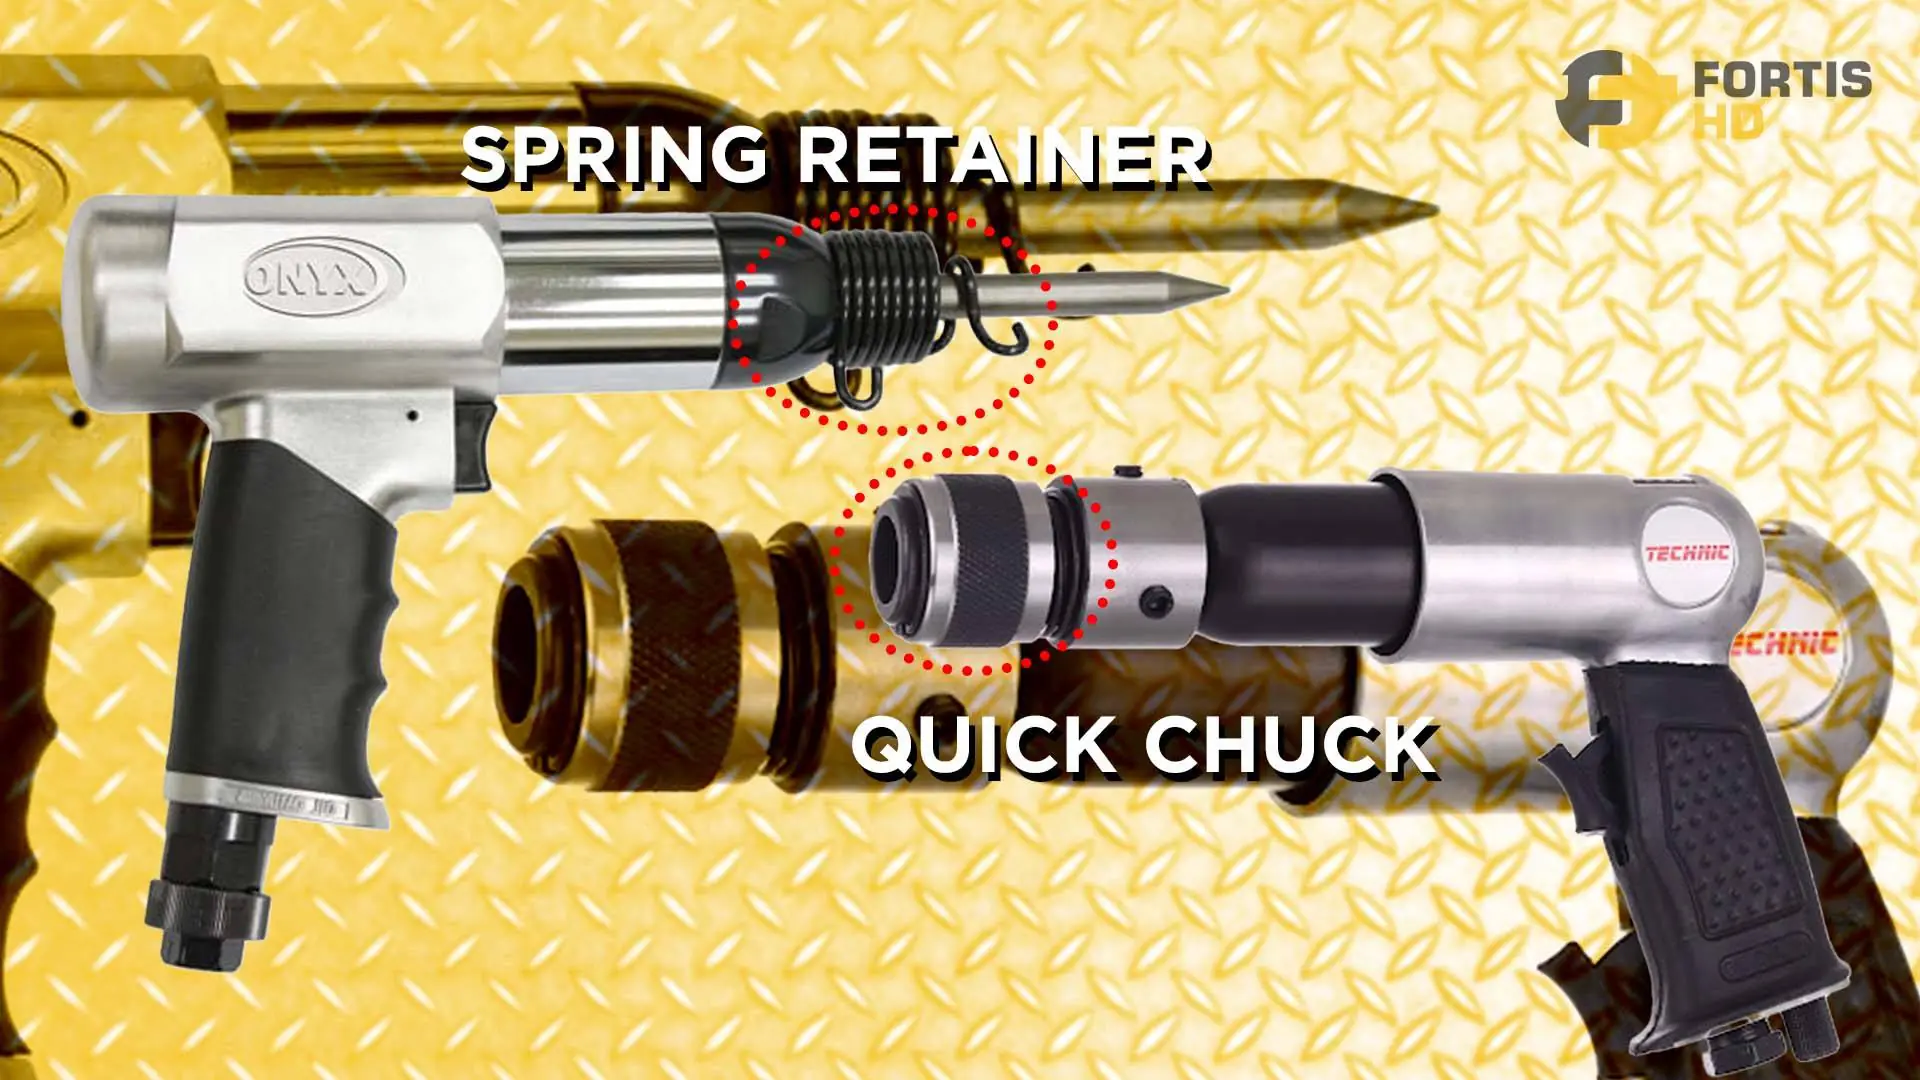 Comparison between a quick chuck and a spring retainer for air hammers.